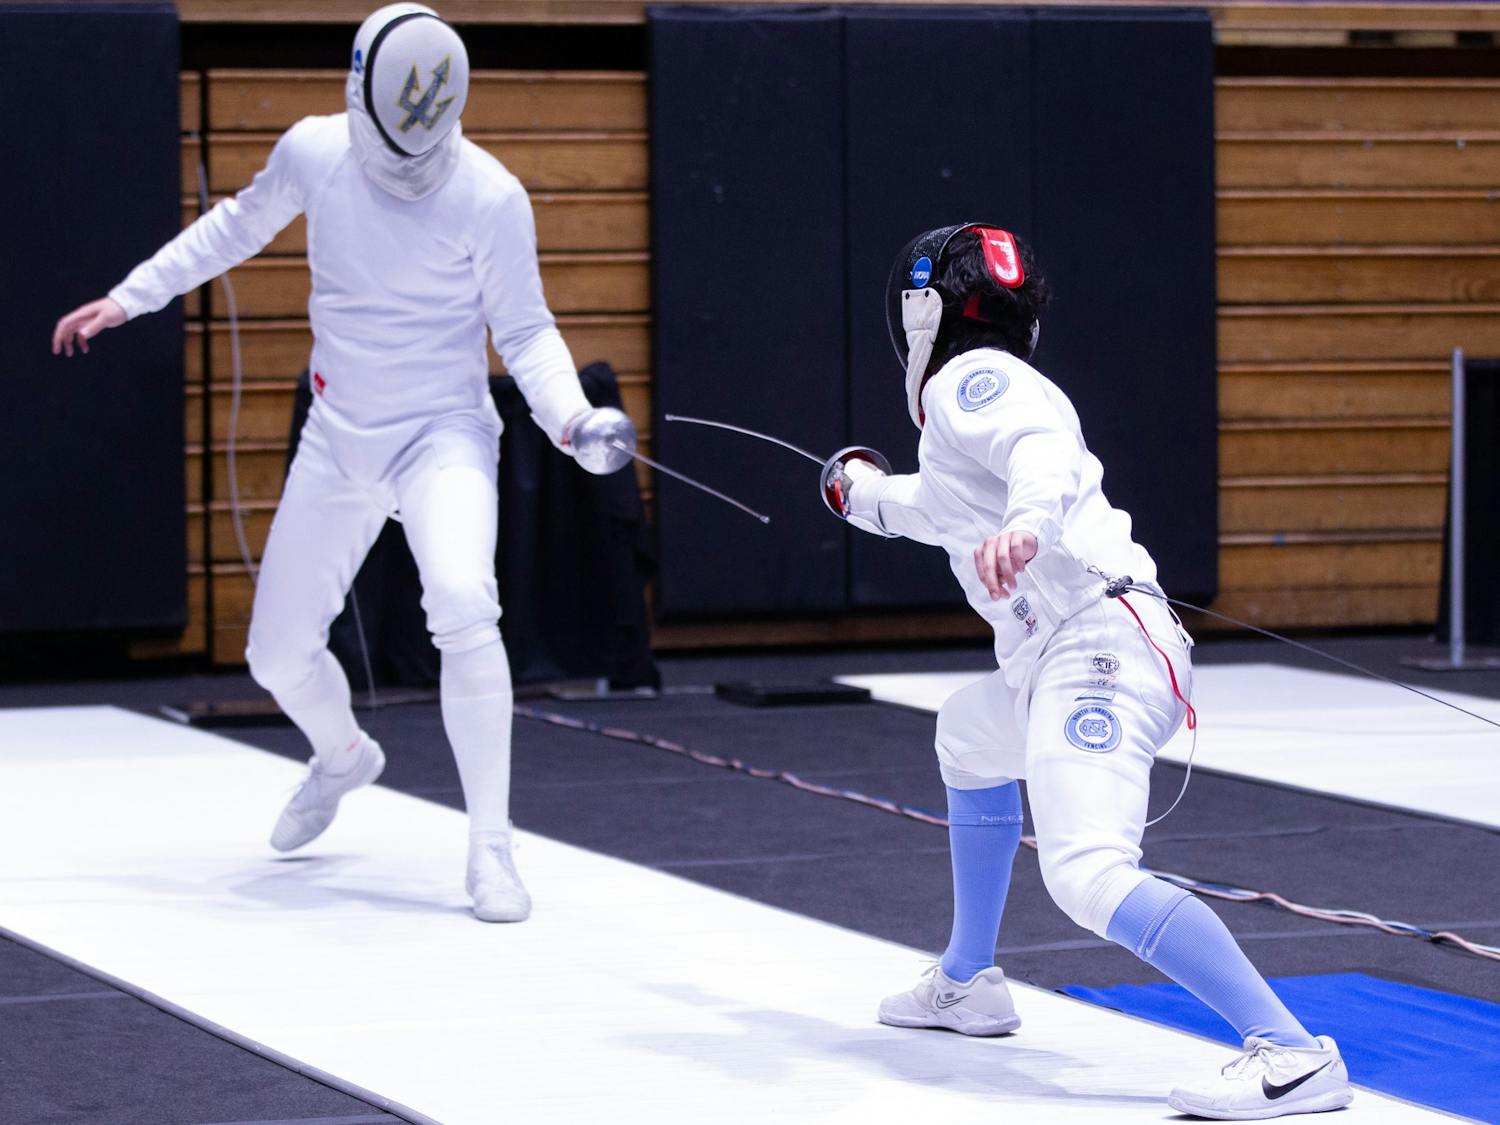 UNC sophomore epee/right hand Eli Lippman fences during the NCAA Fencing Championships at Cameron Indoor Stadium in Durham, N.C. on Friday, March 24, 2023.